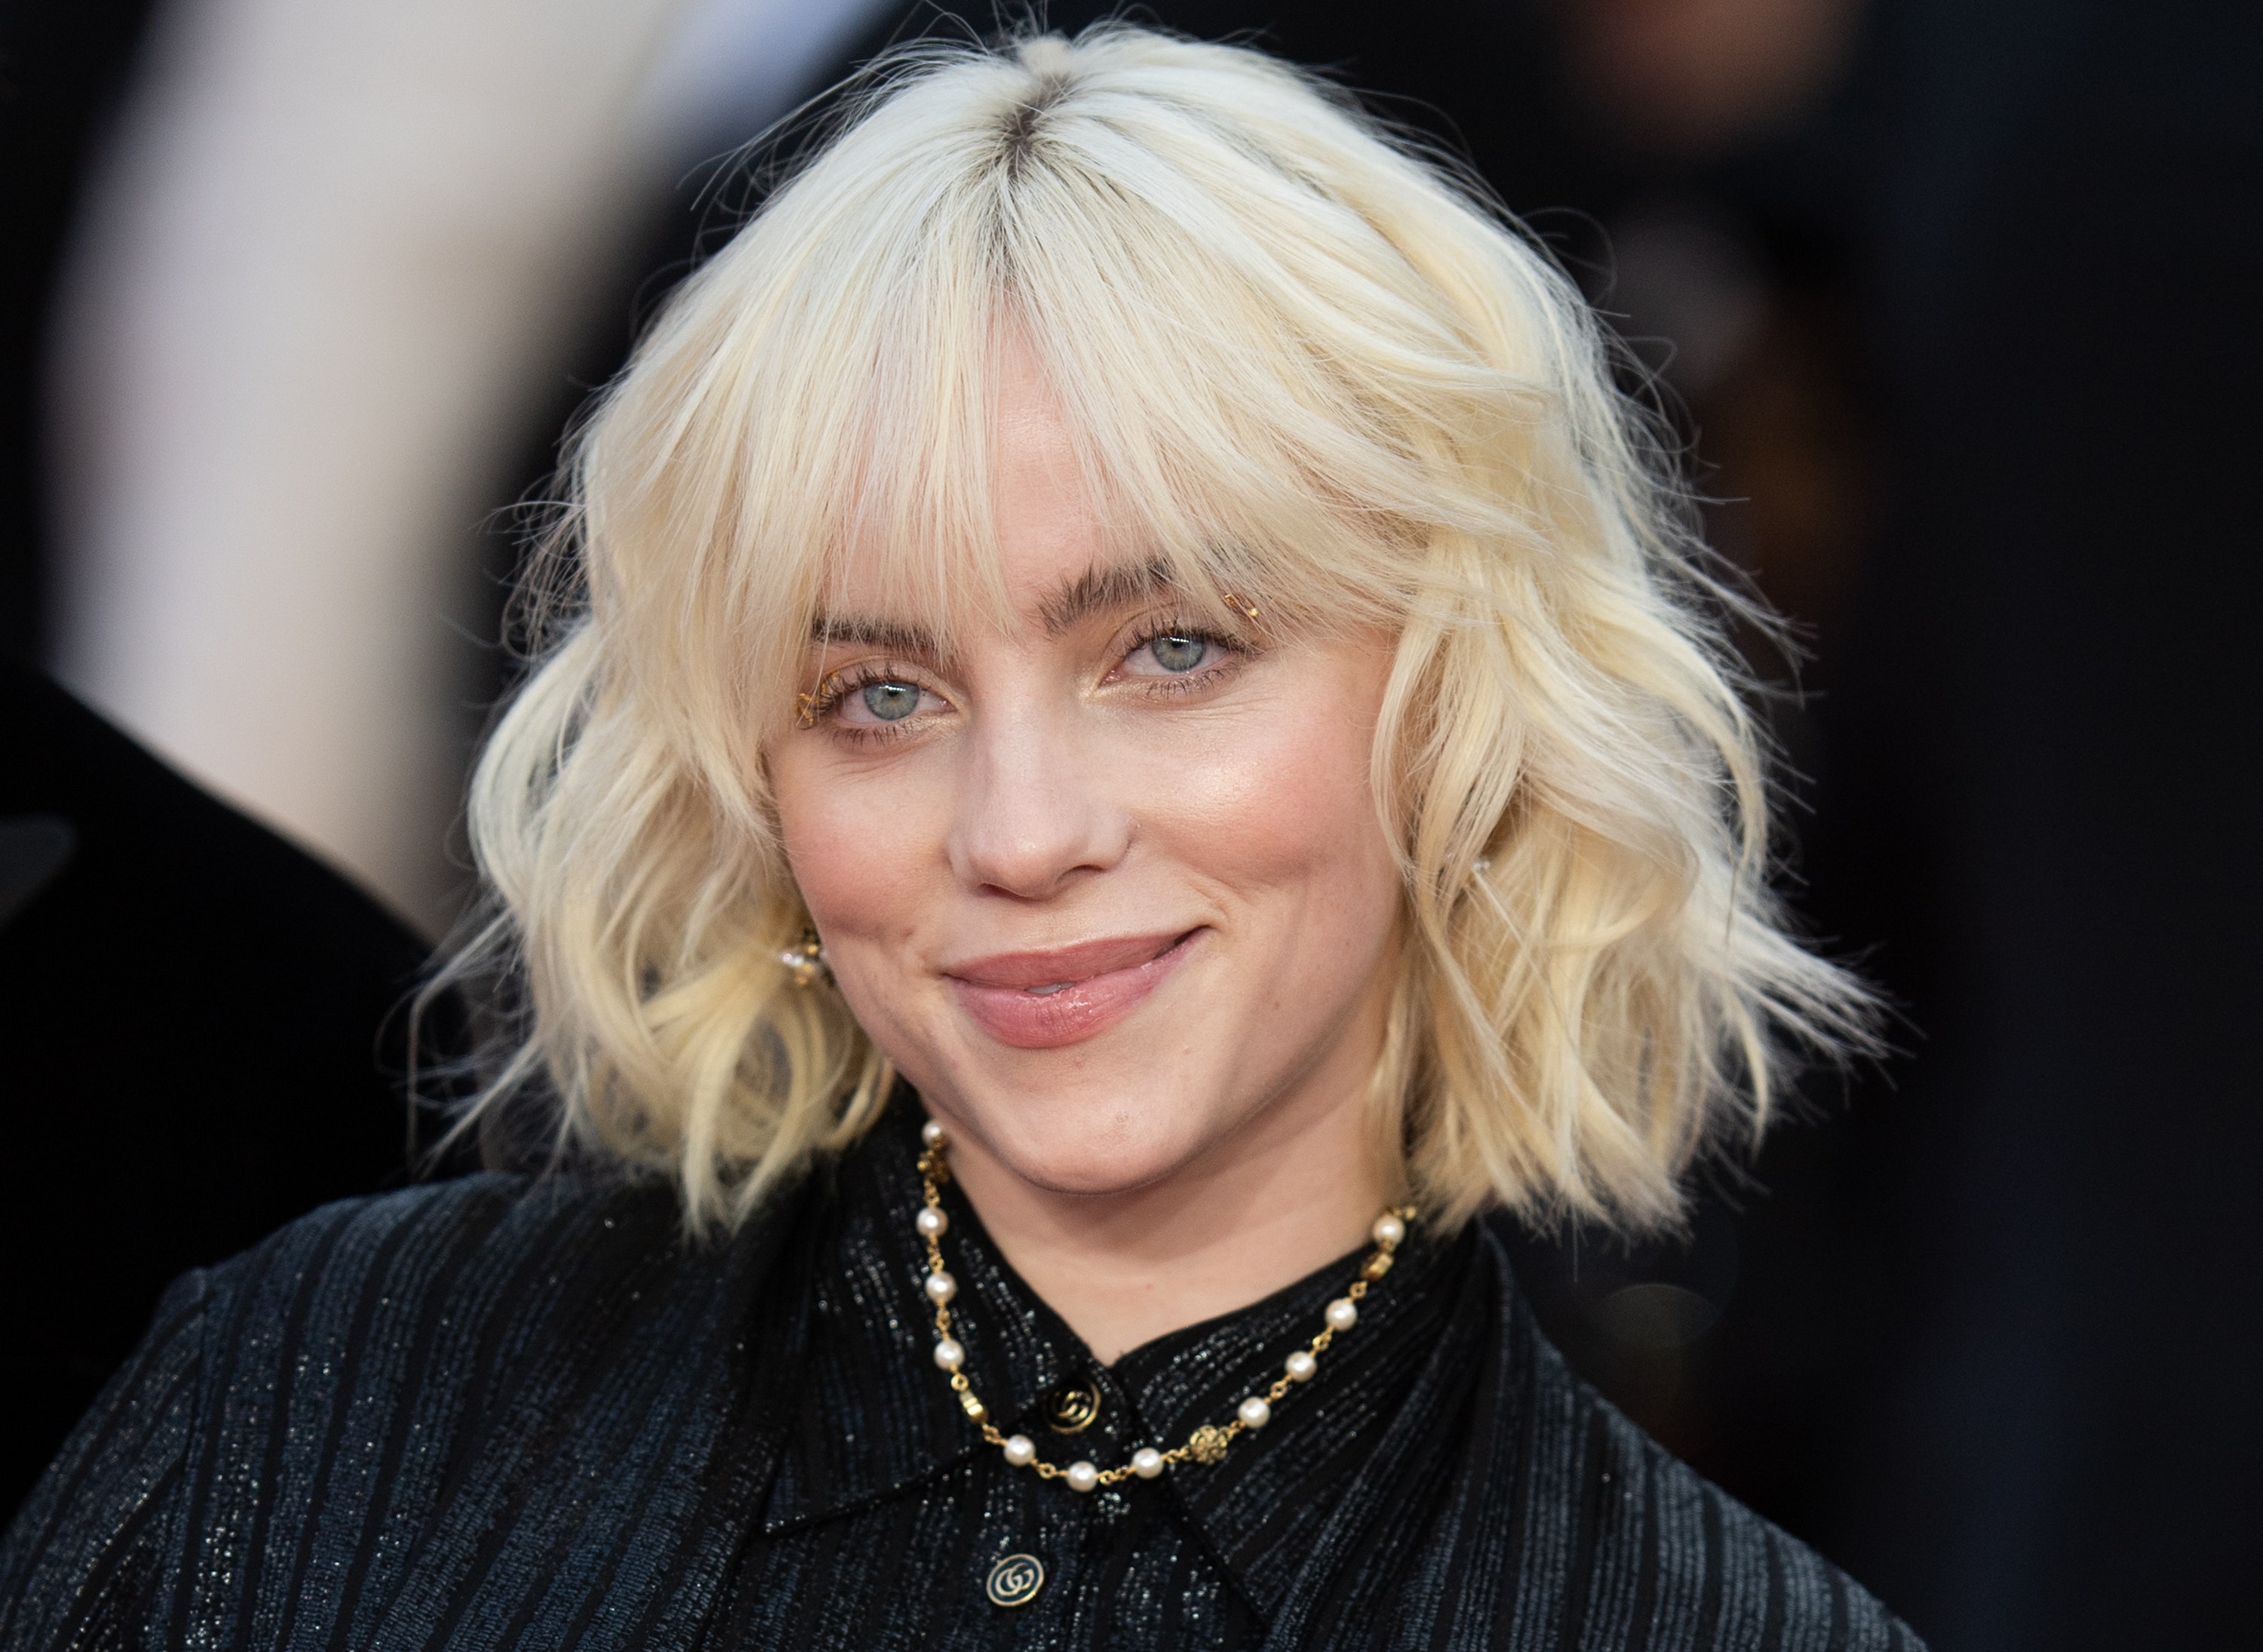 Billie Eilish's Blonde Hair: How to Maintain and Care for It - wide 2